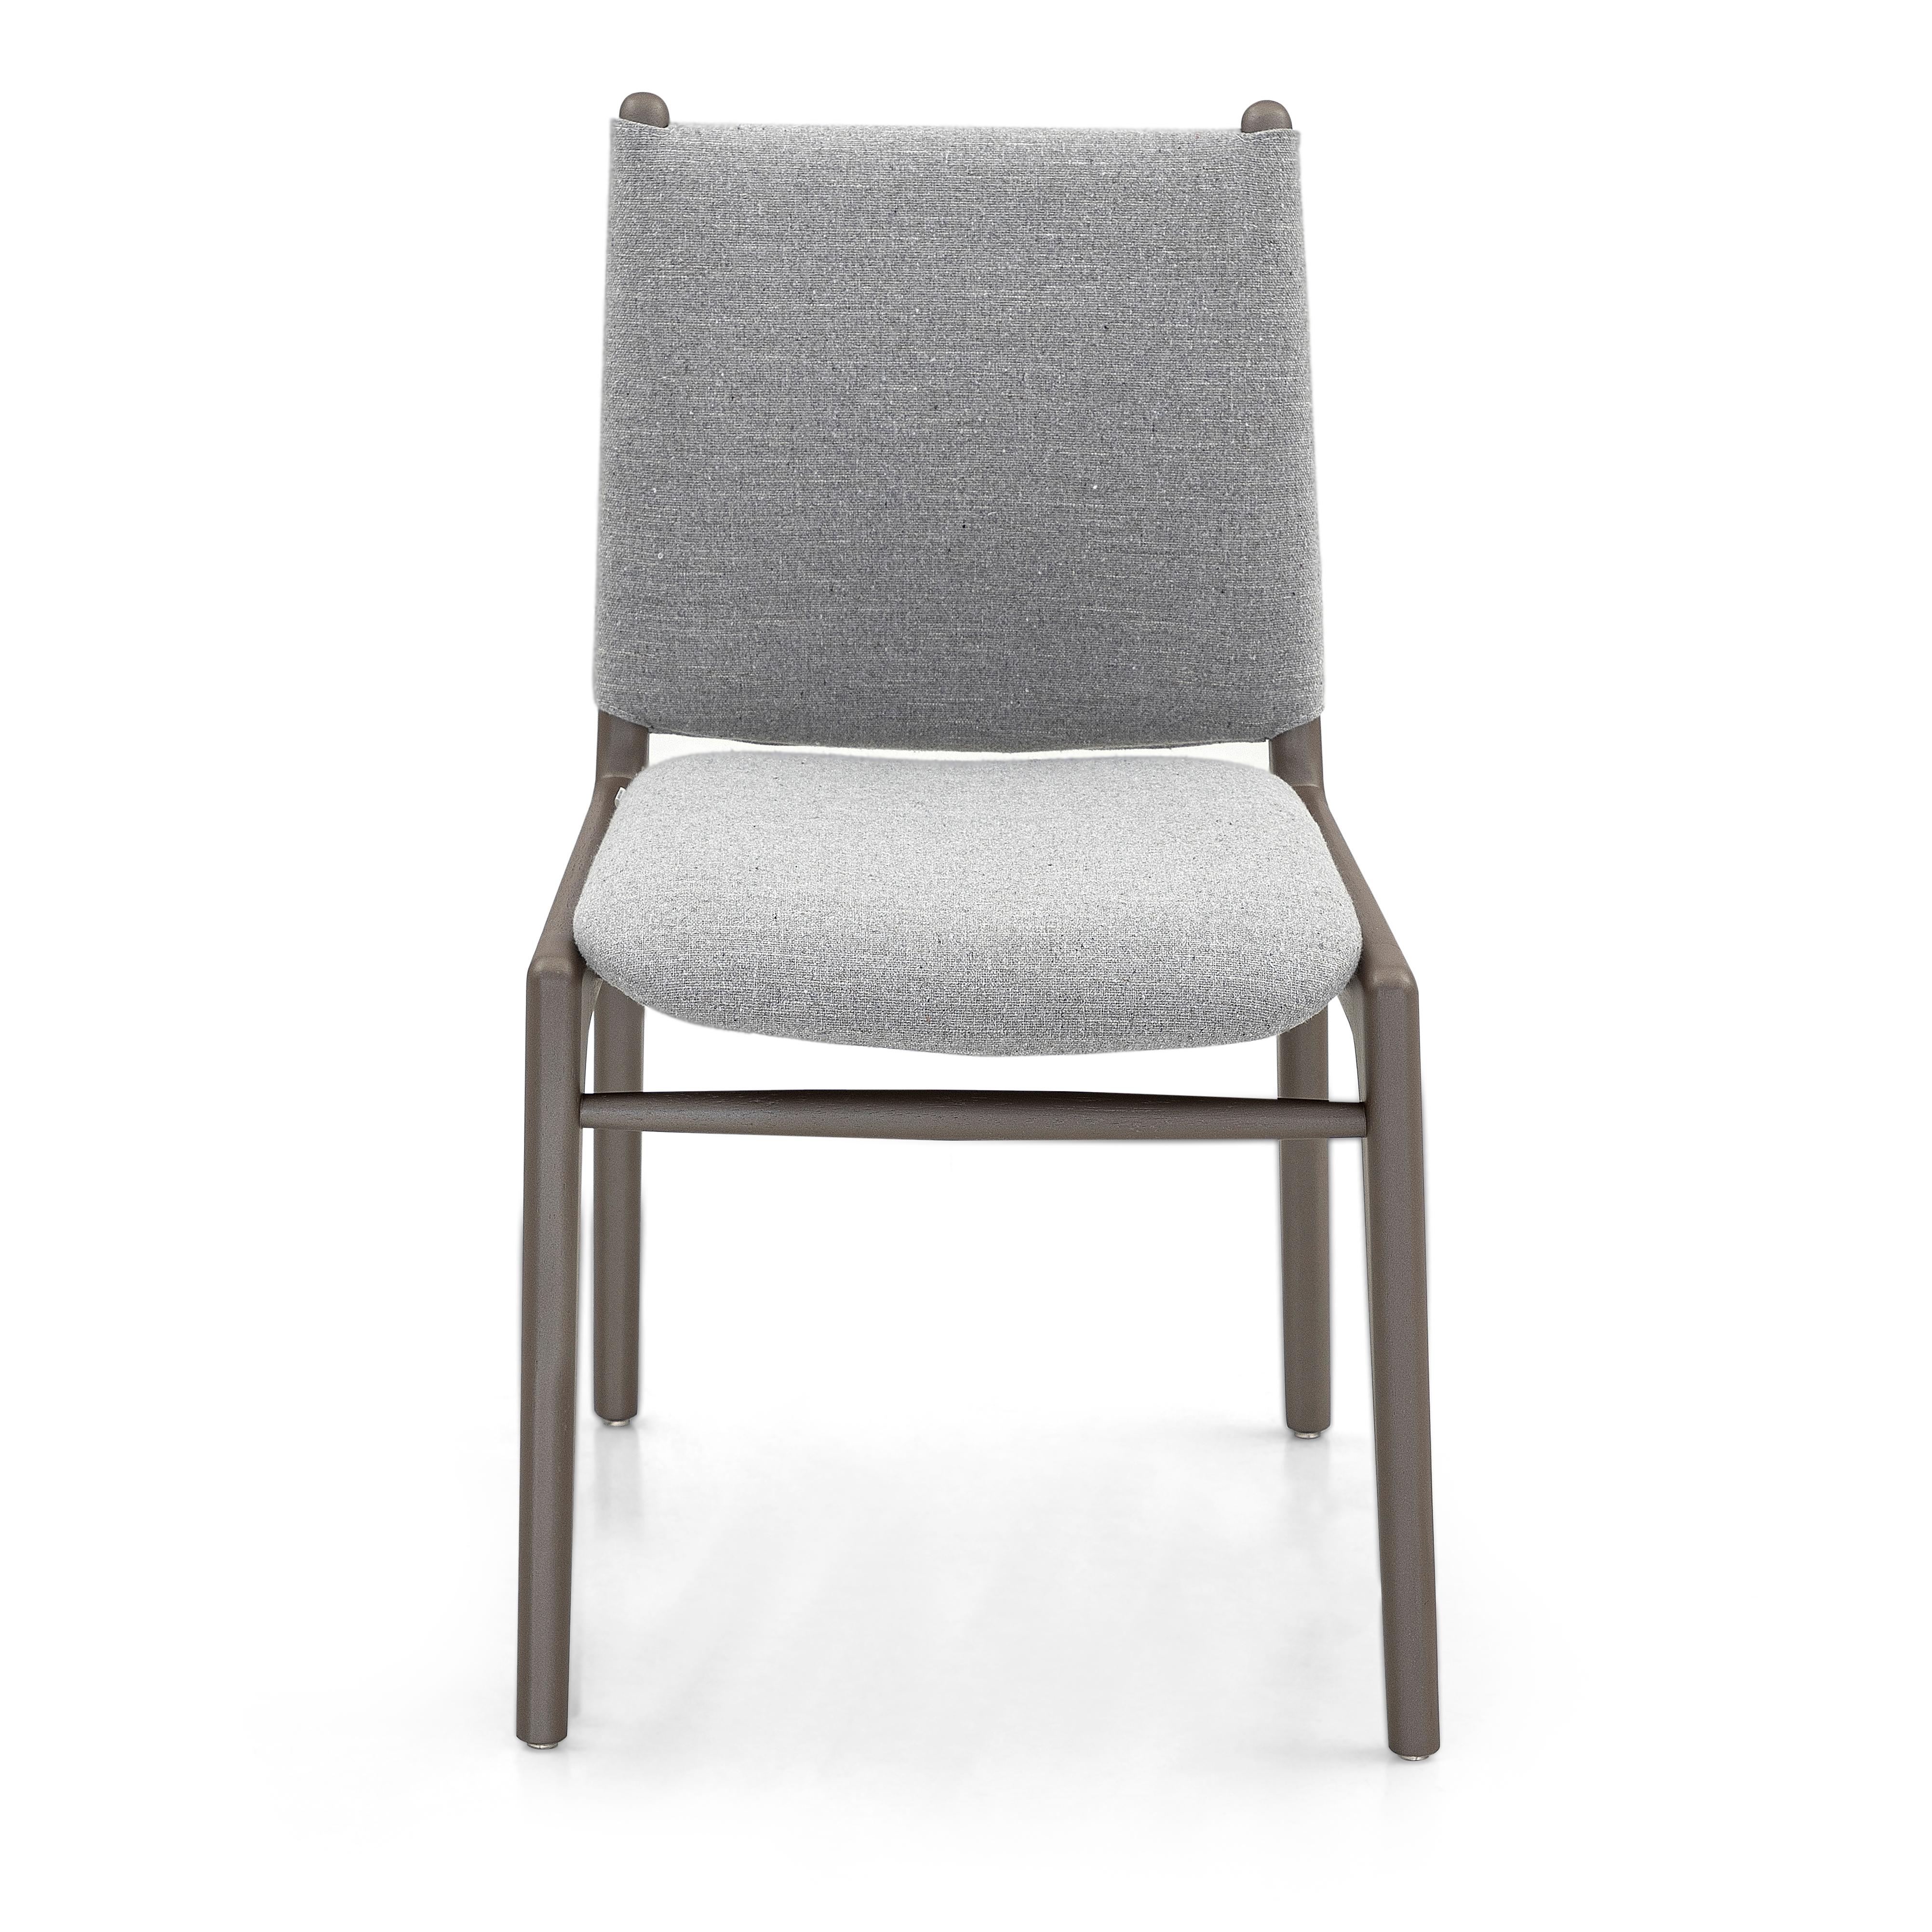 Upholstery Cappio Dining Chair in Chocolate Wood Color with Gray Fabric, set of 2 For Sale